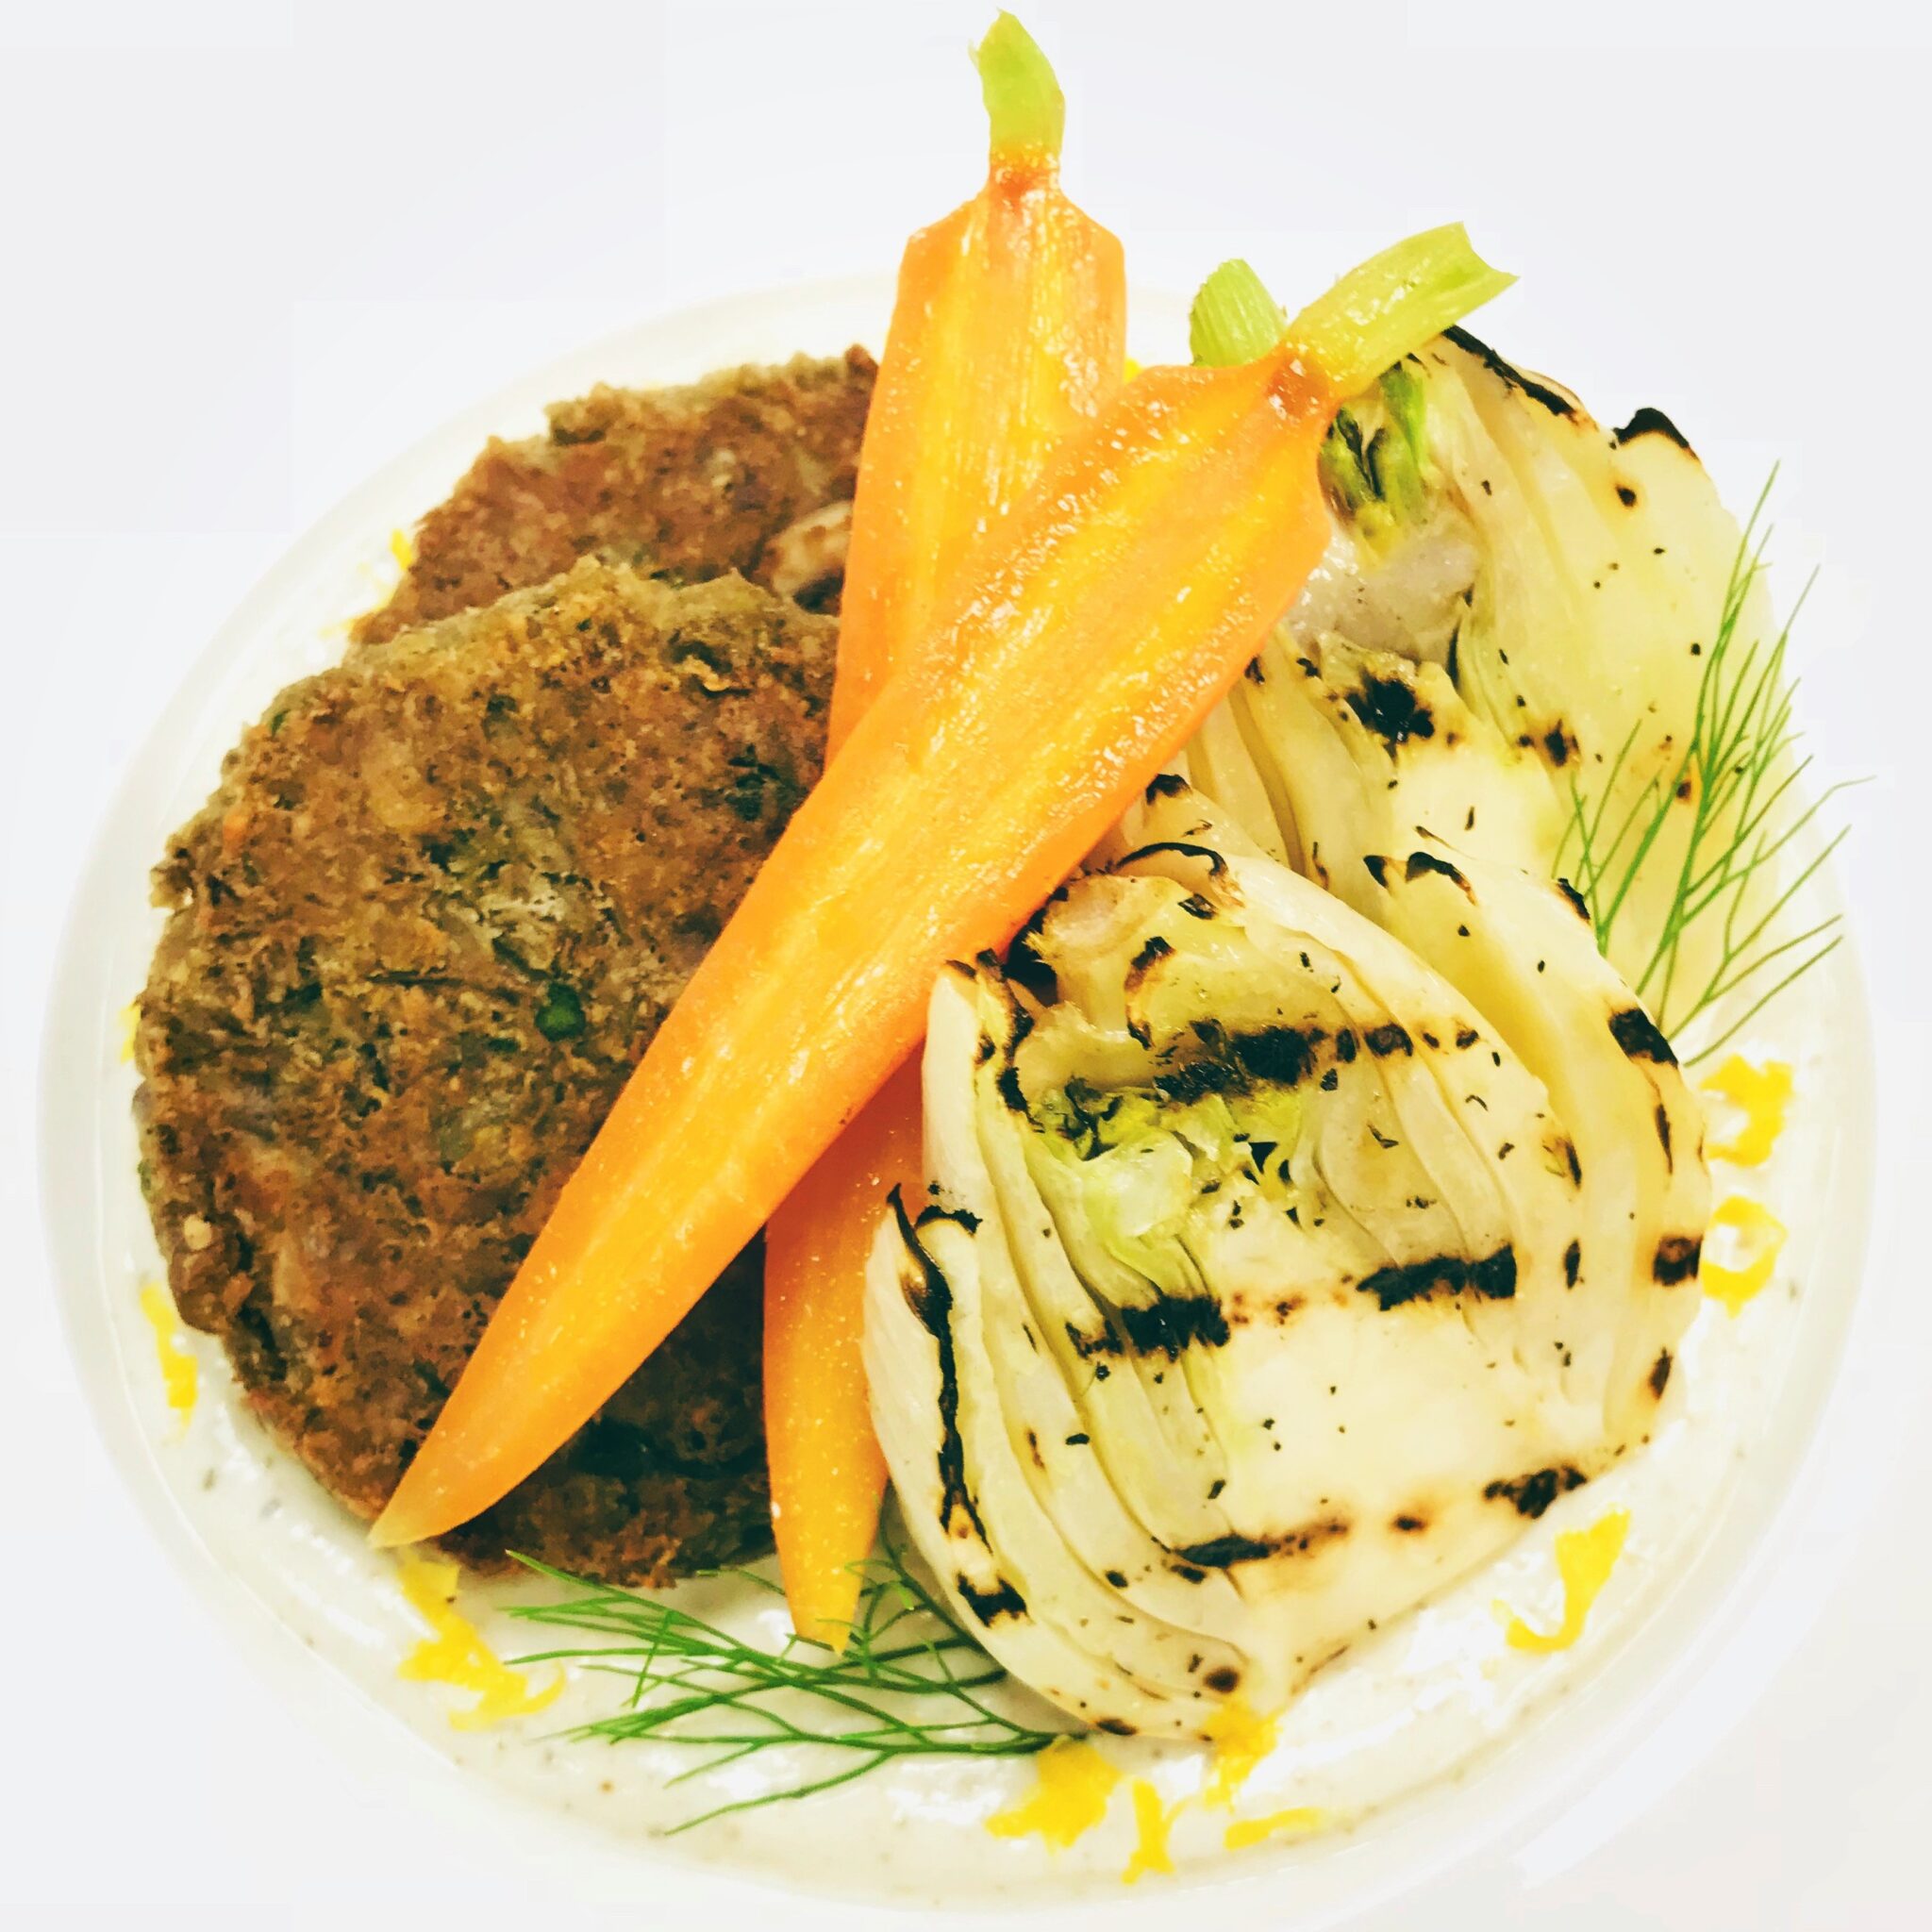 Plant Based Lentil Cakes with Lemon Cumin Yogurt, Charred Fennel, and Roasted Carrots